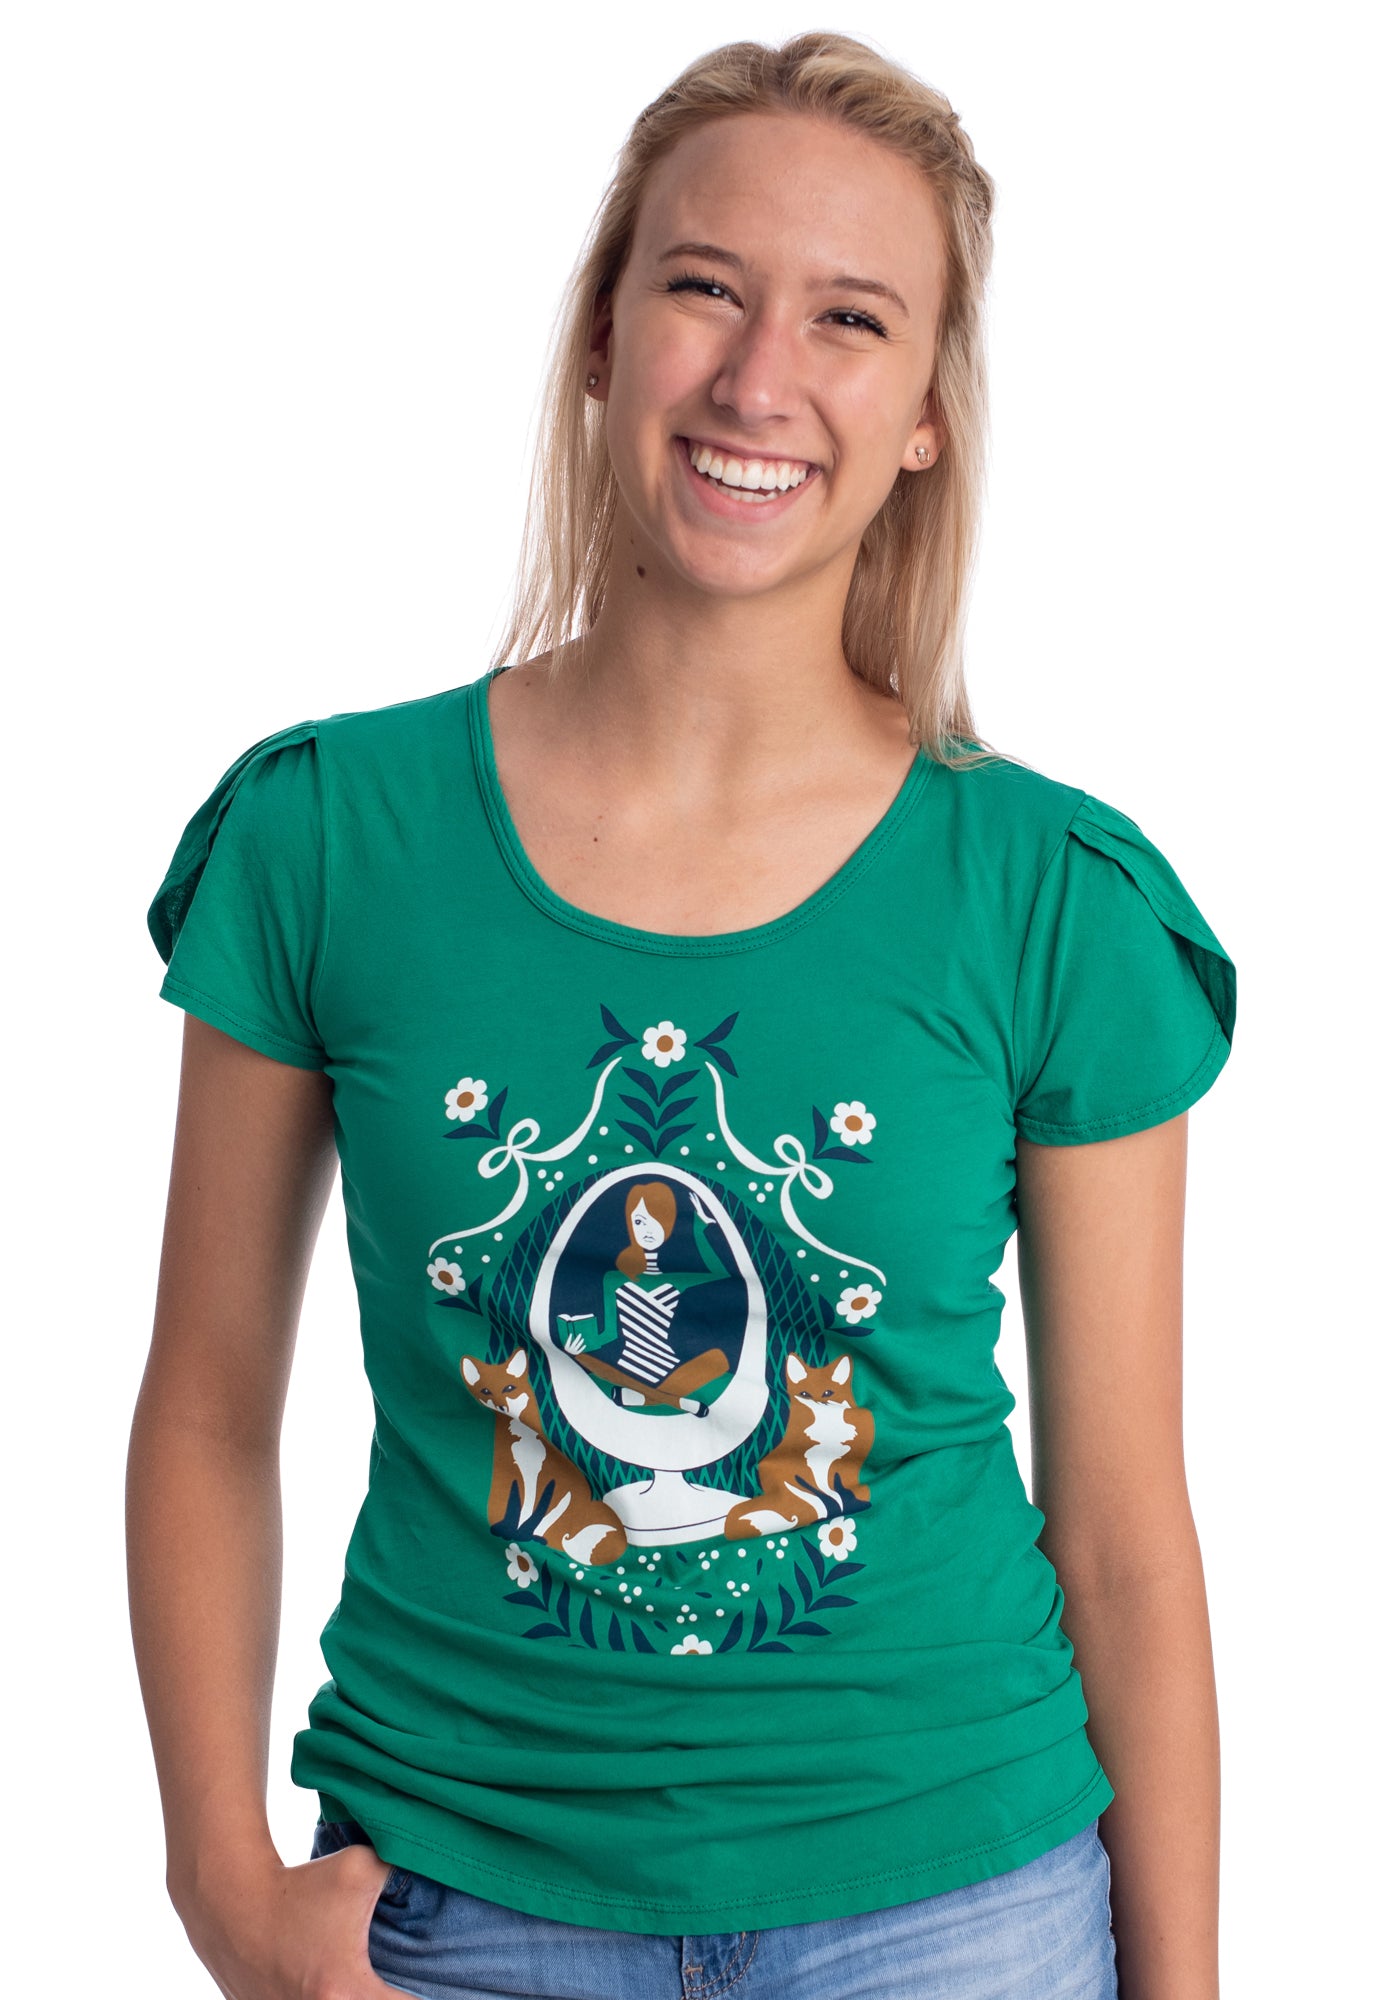 Emerald green tulip-sleeved graphic tee with girl reading a book in an egg chair with 2 foxes